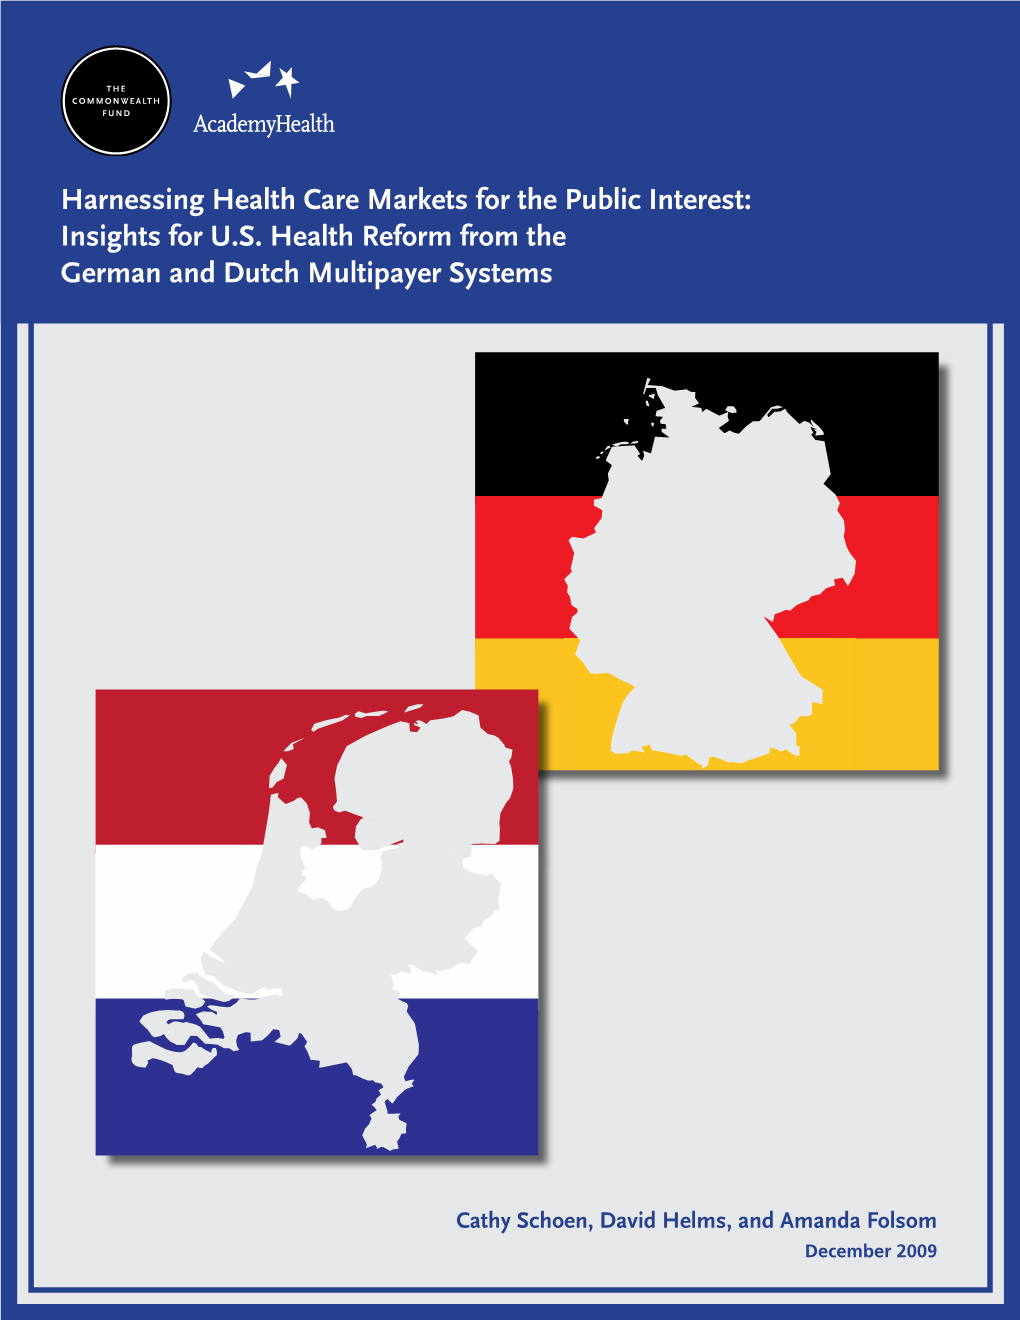 Insights for US Health Reform from the German and Dutch Multipayer